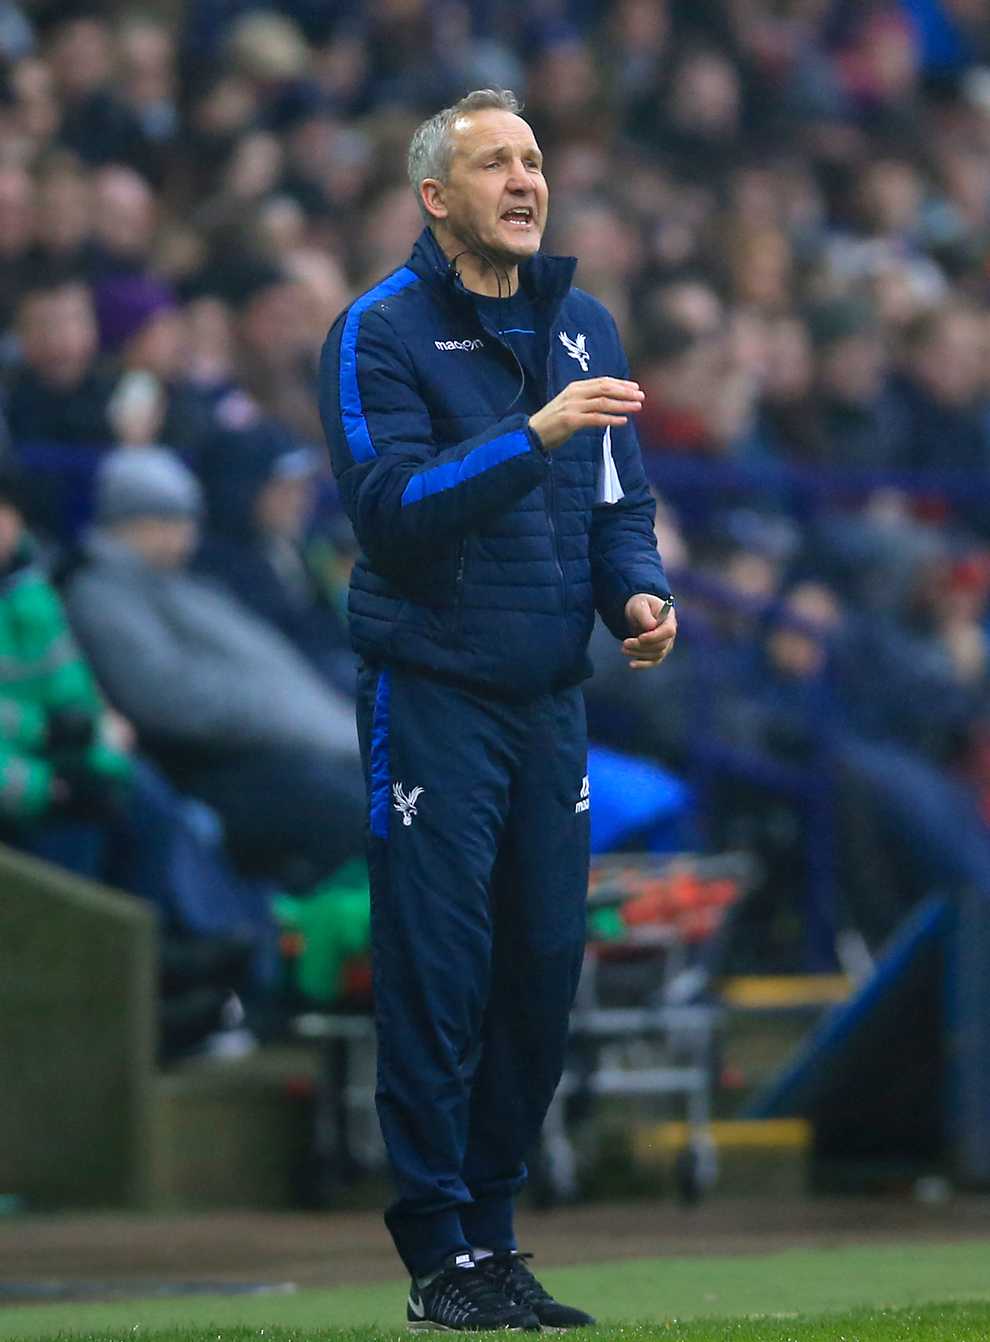 Carlisle boss Keith Millen praised his side’s ‘resilience’ after a 1-0 win at Scunthorpe (Clint Hughes/PA Images).